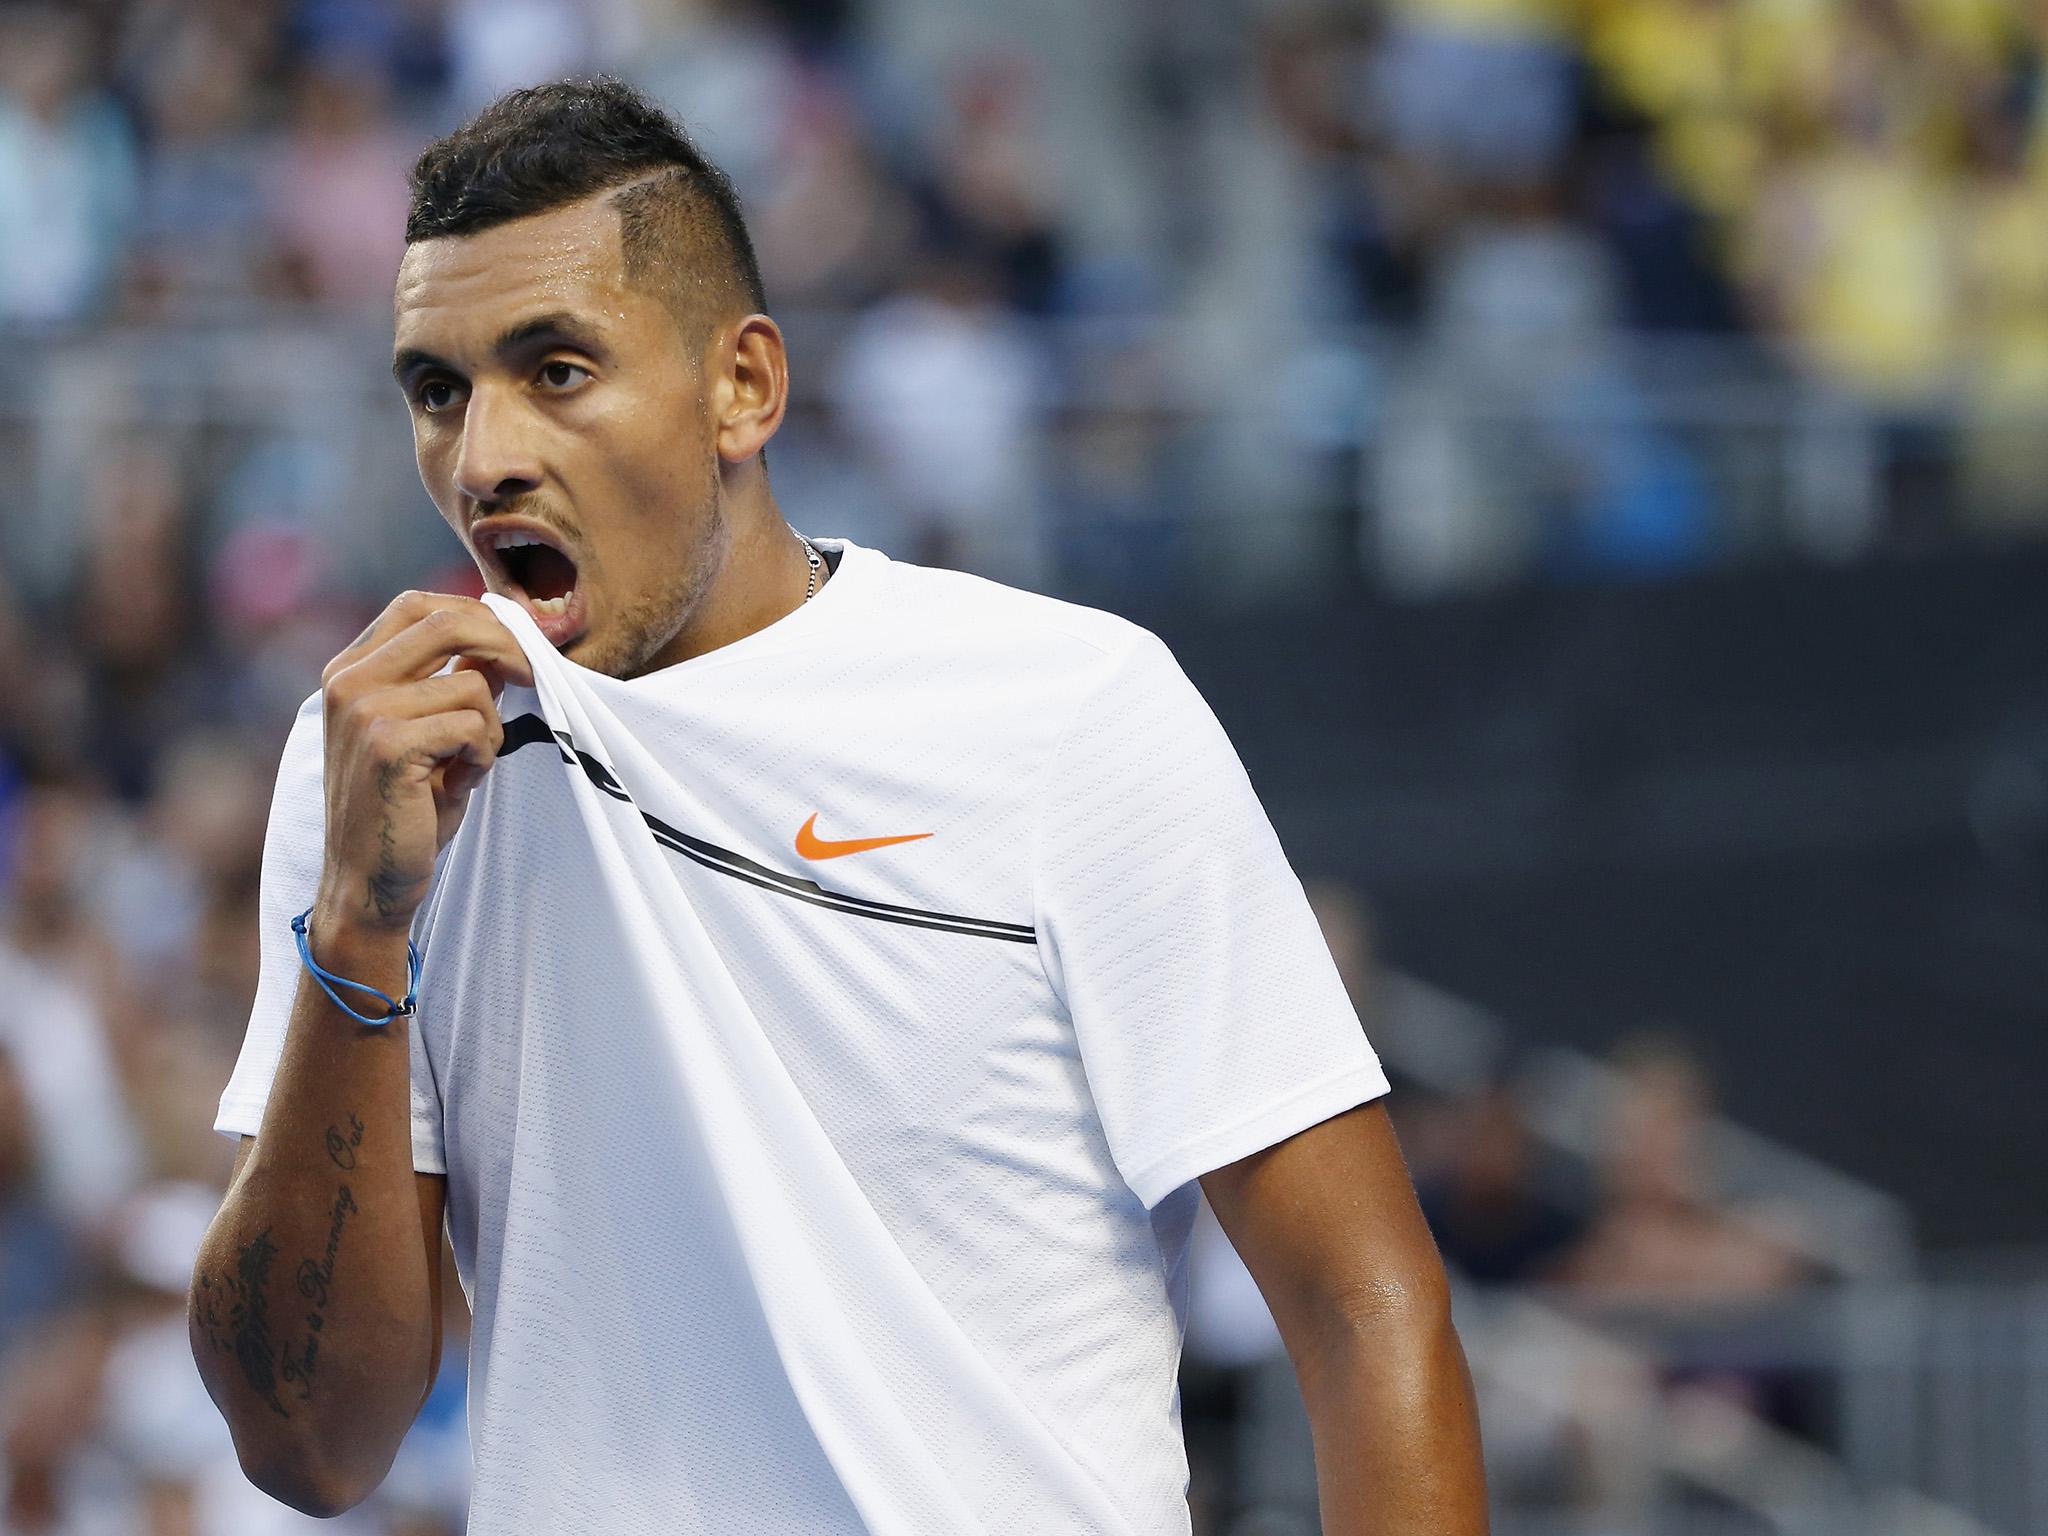 The 'bad boy of tennis' has caused controversy again